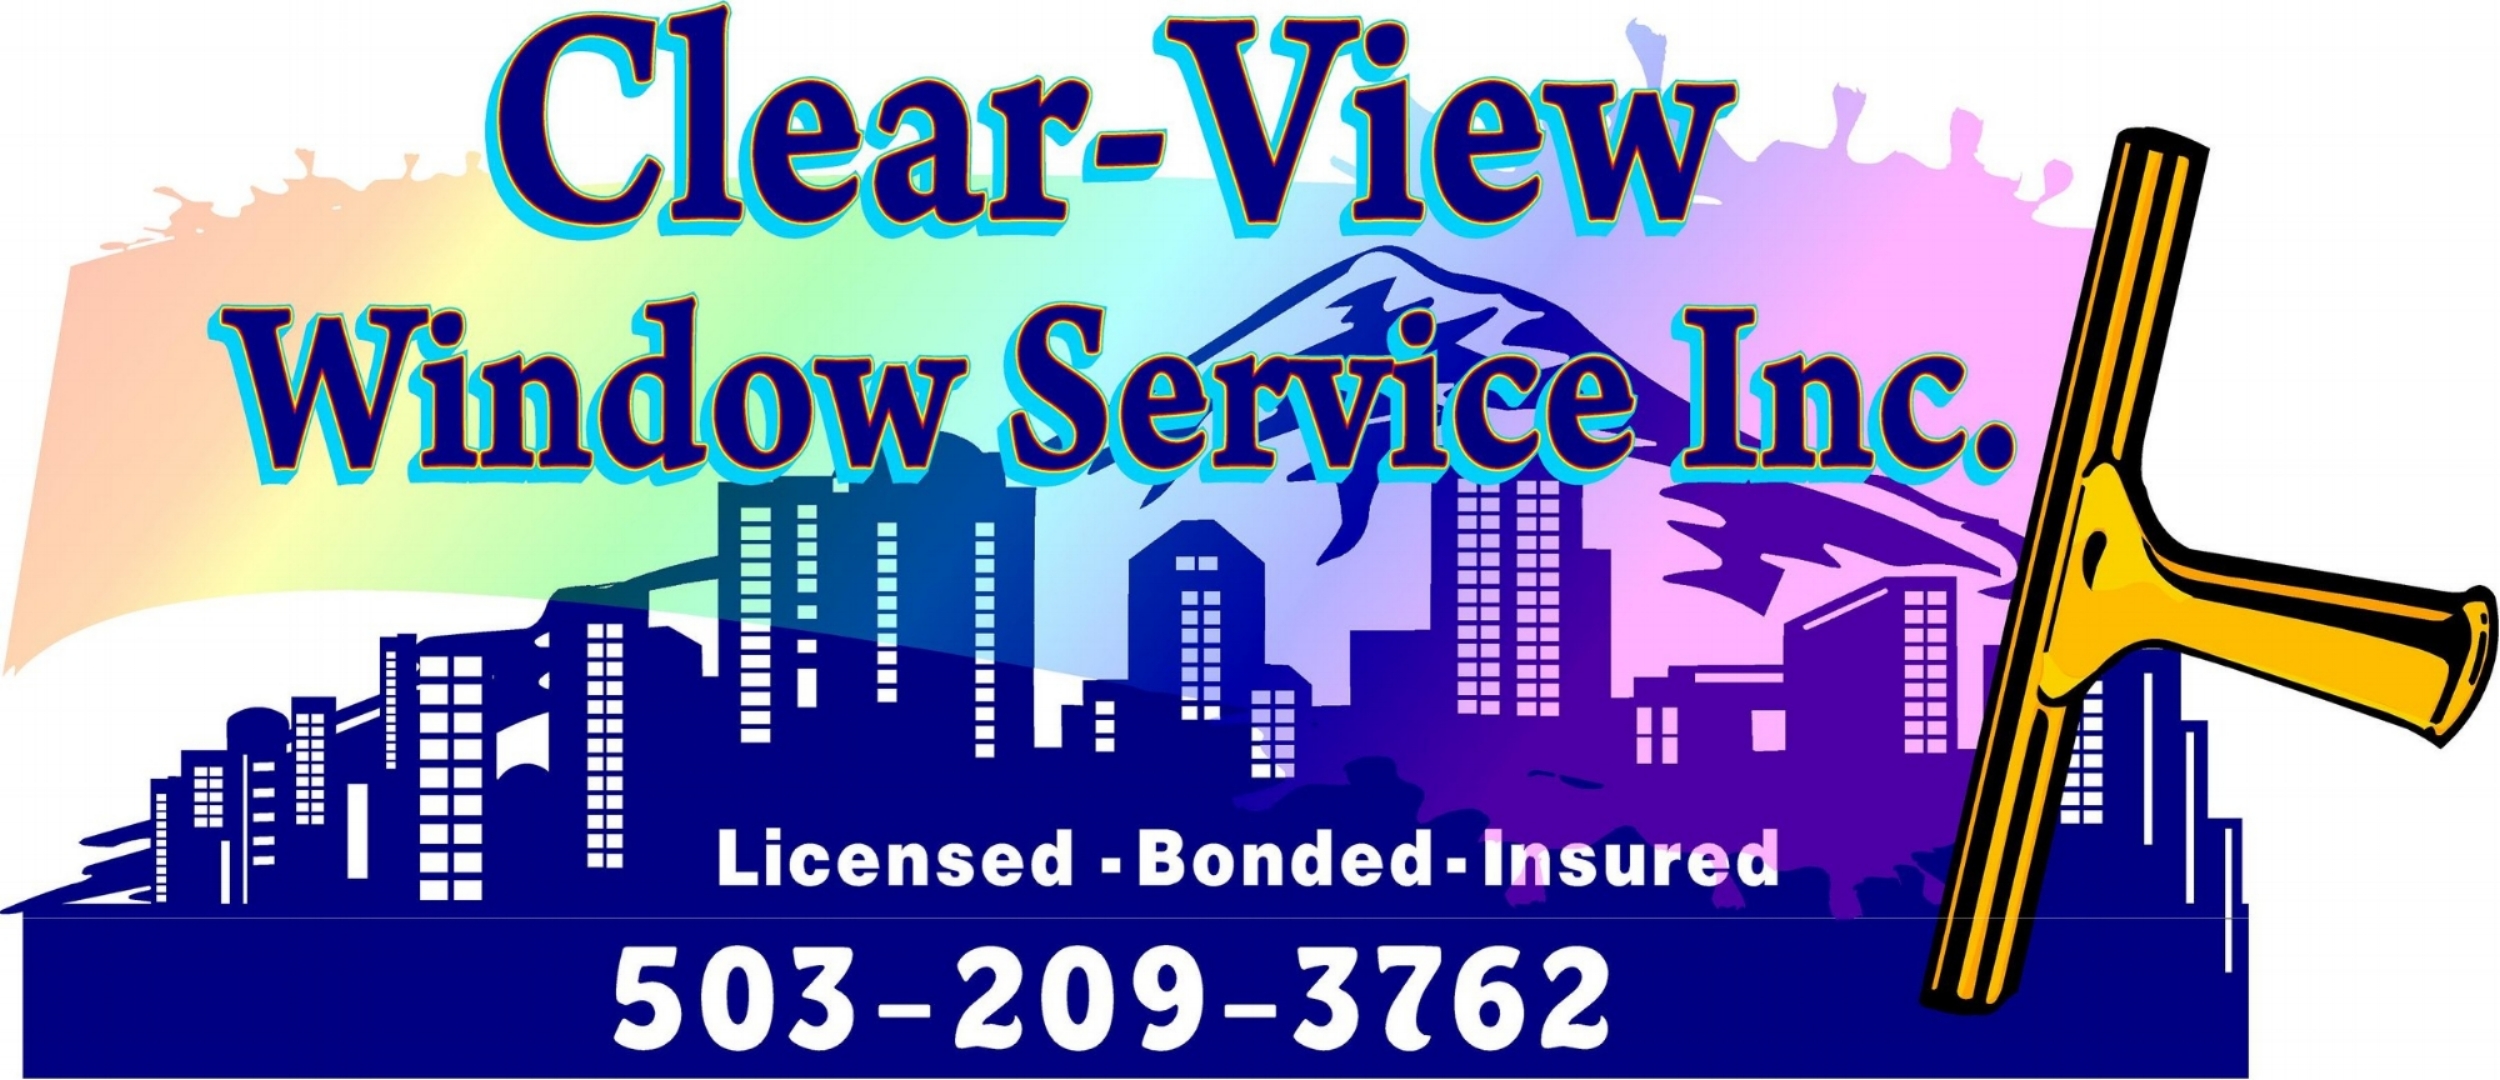 Clear-View Window Service Inc.